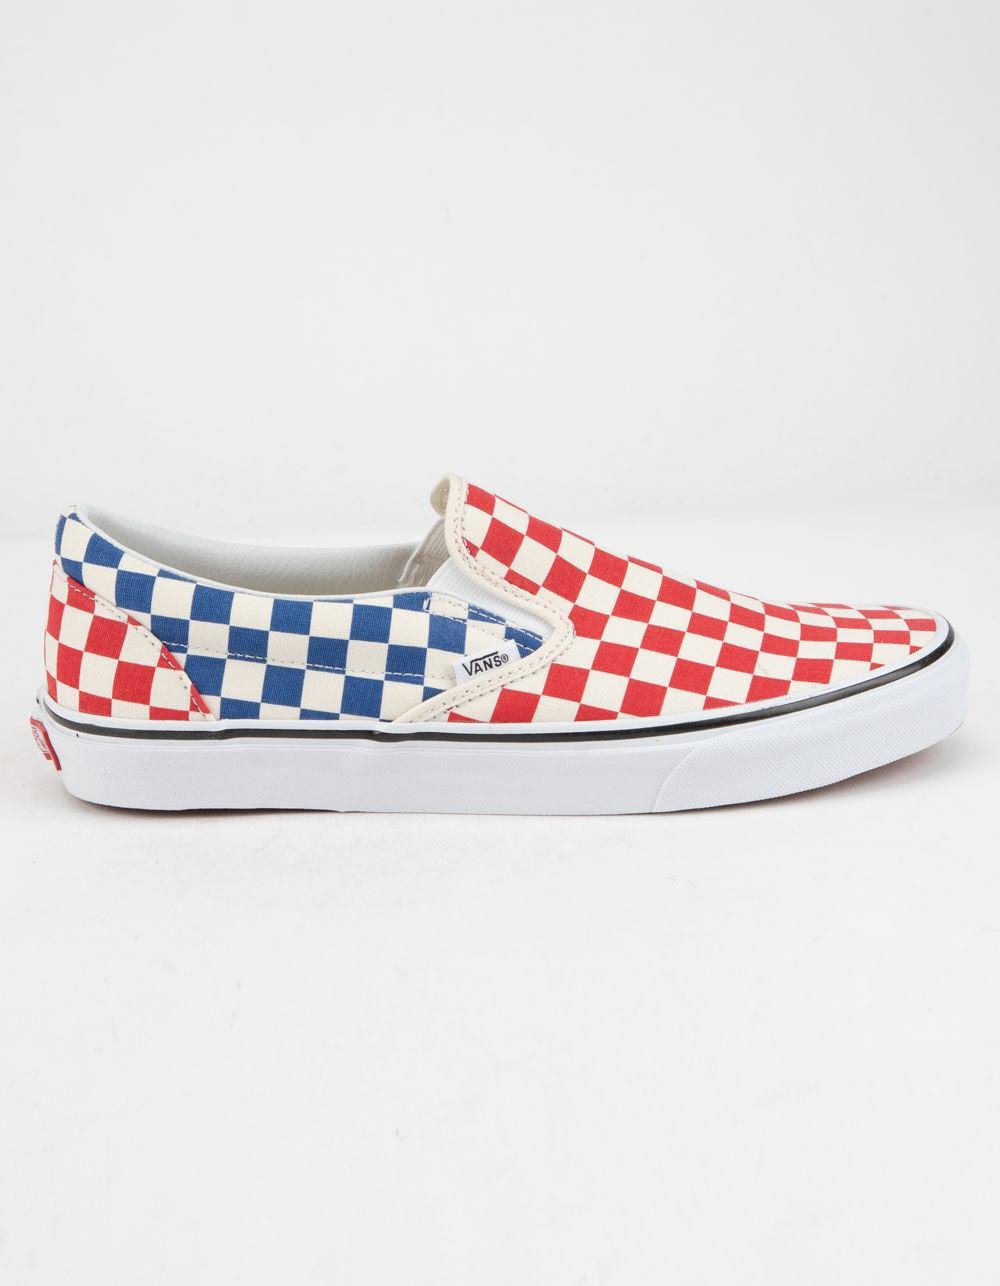 red and blue vans shoes